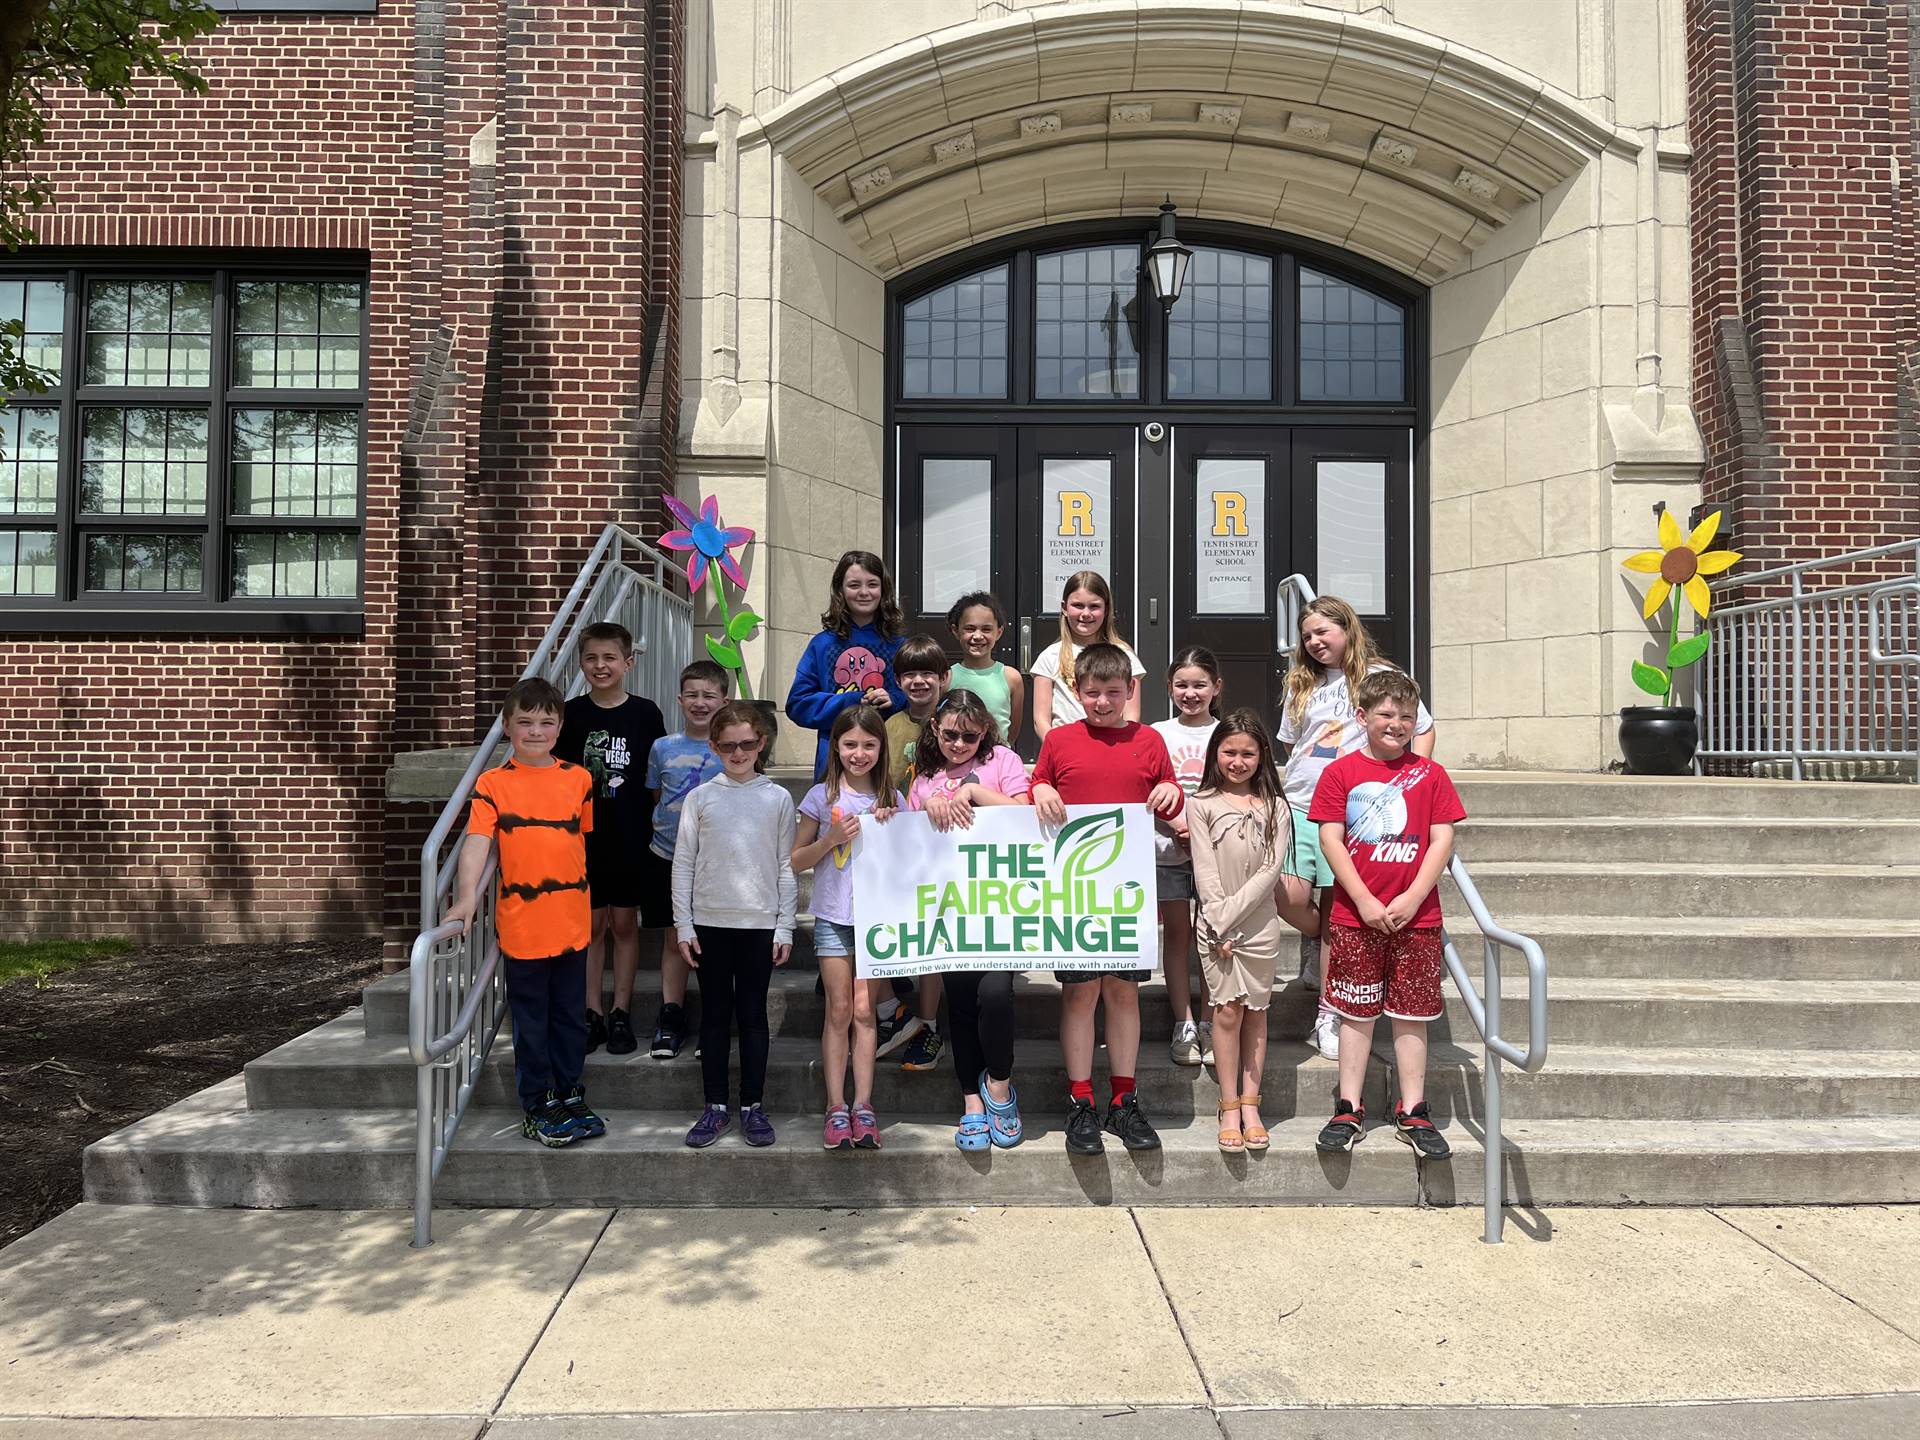 Tenth Street Third Graders pose in front of a "Fairchild Challenge" banner